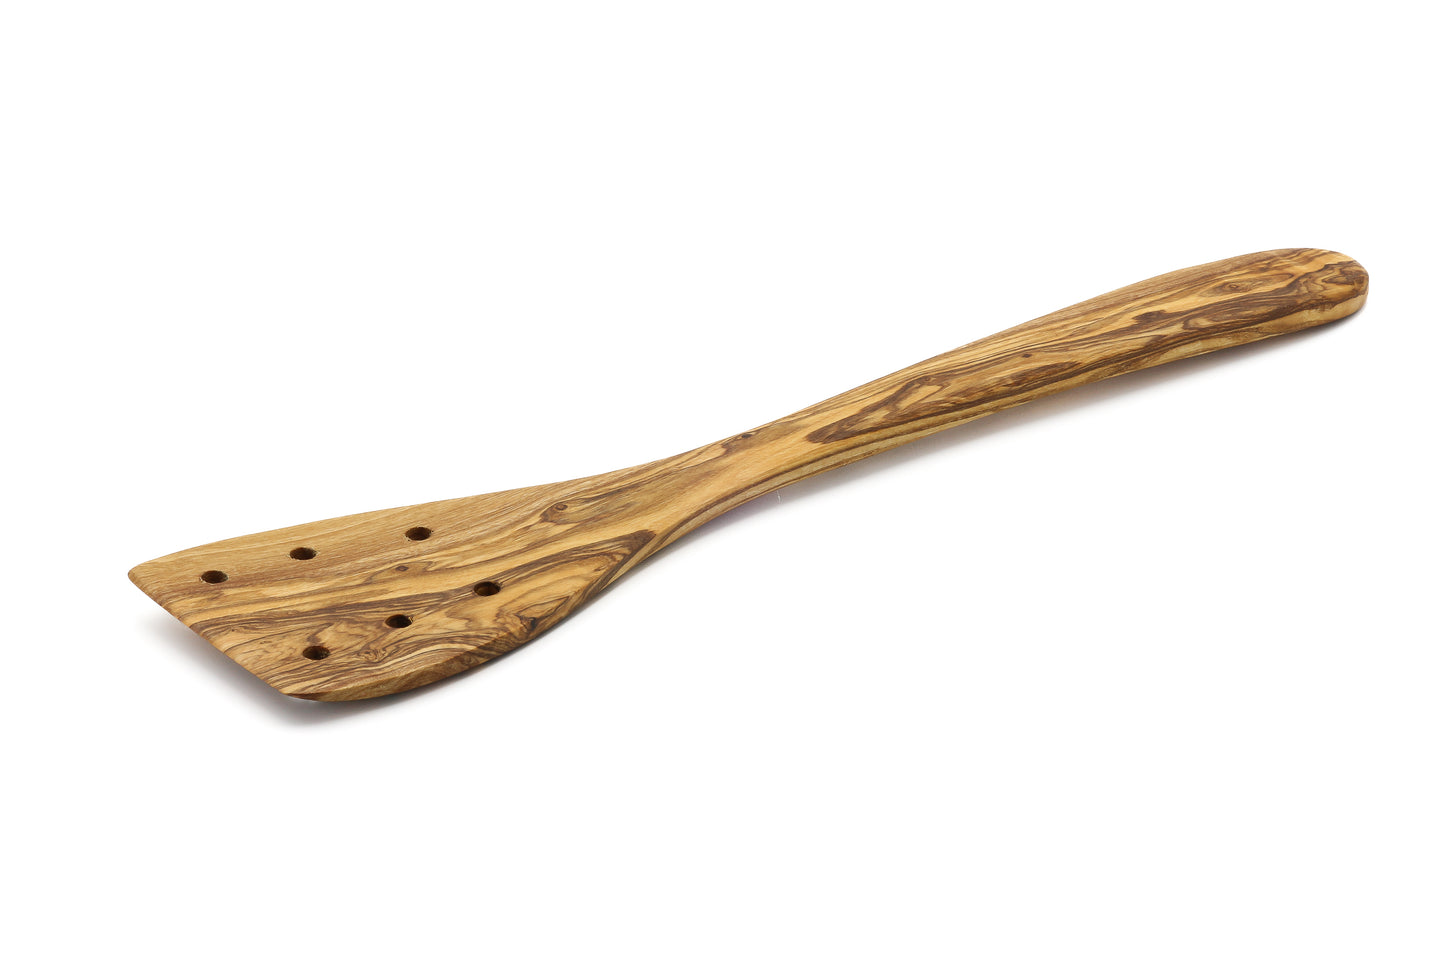 Olive wood kitchen utensil with perforations